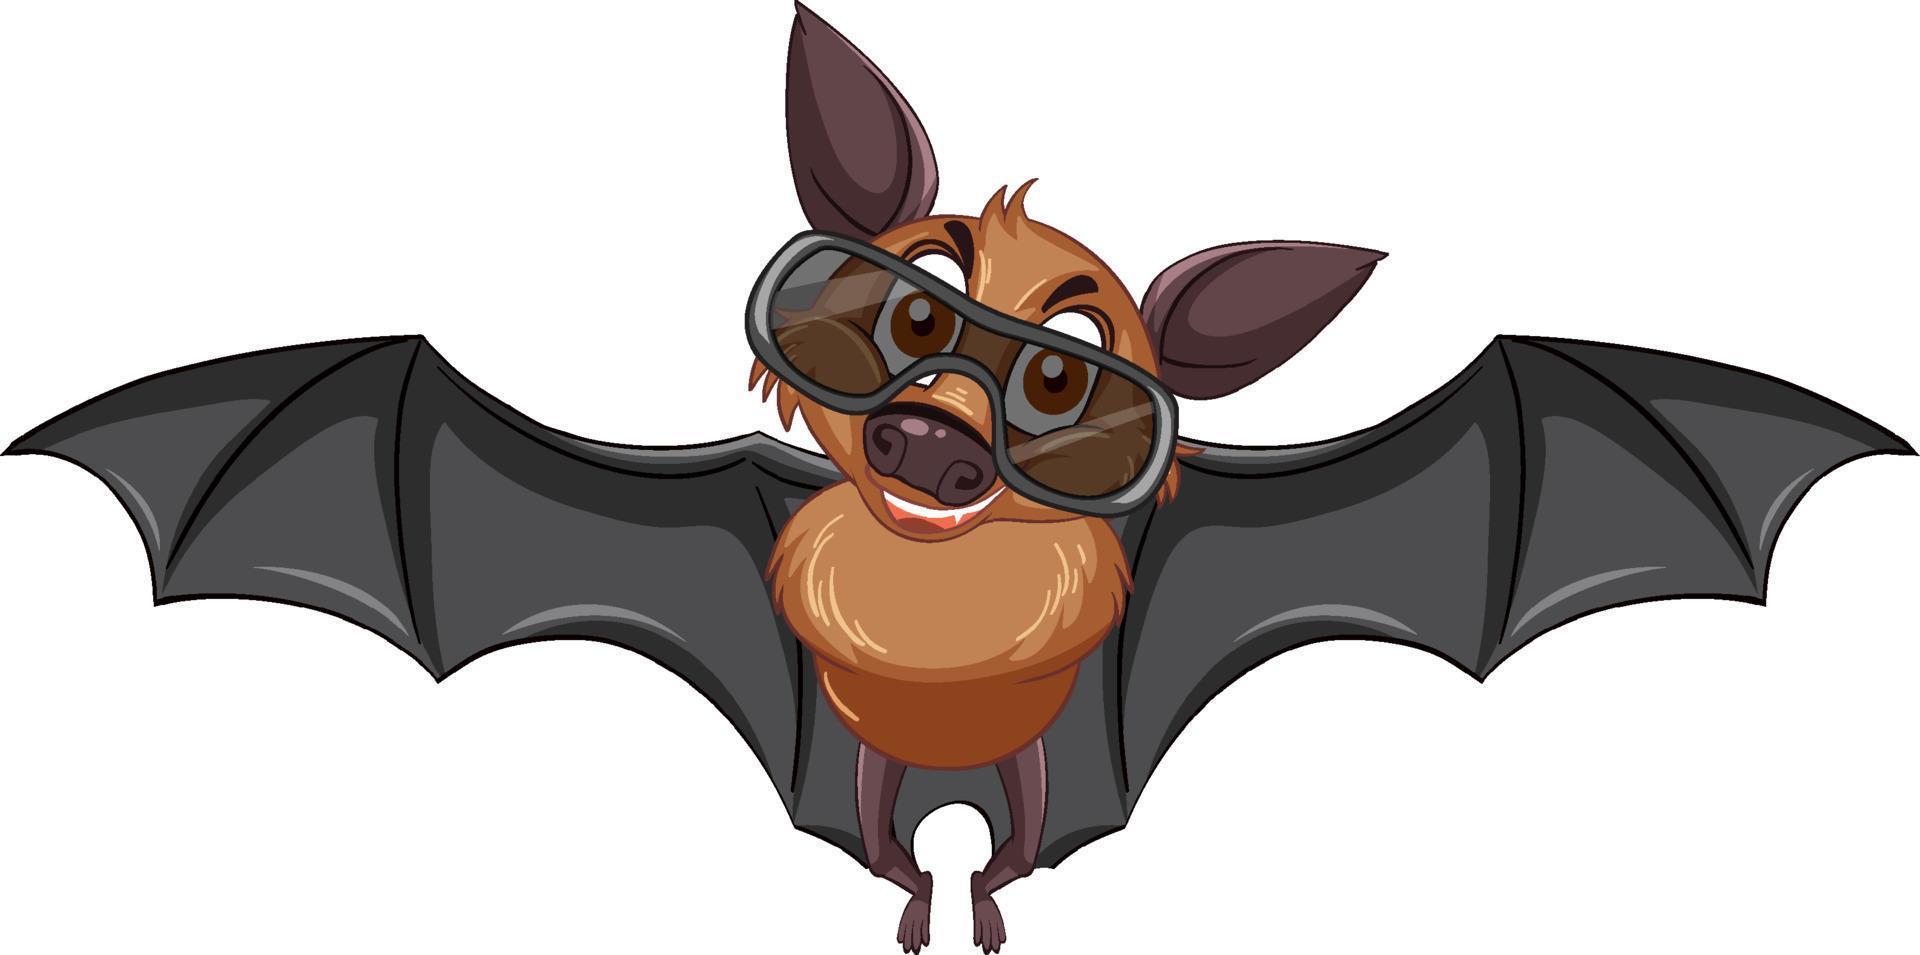 Bat wearing sunglasses cartoon character on white background vector